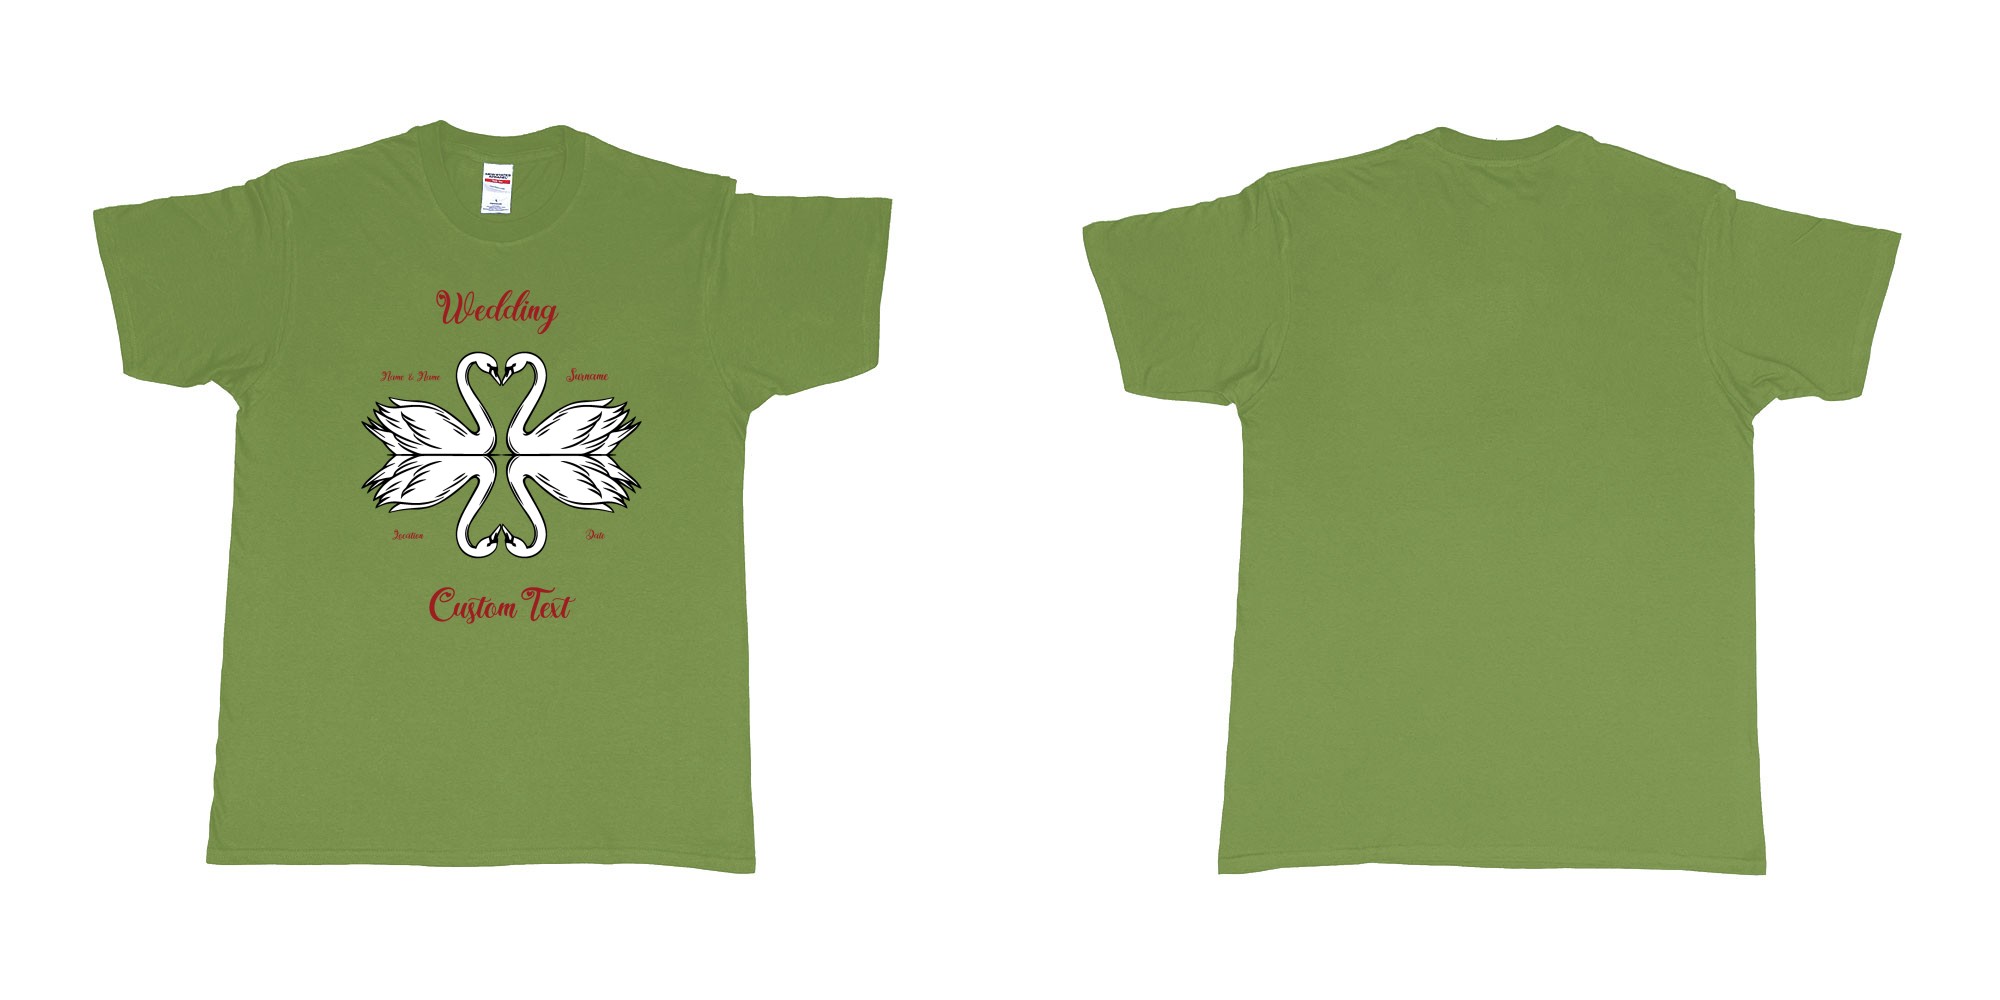 Custom tshirt design swans hearts reflection in fabric color military-green choice your own text made in Bali by The Pirate Way